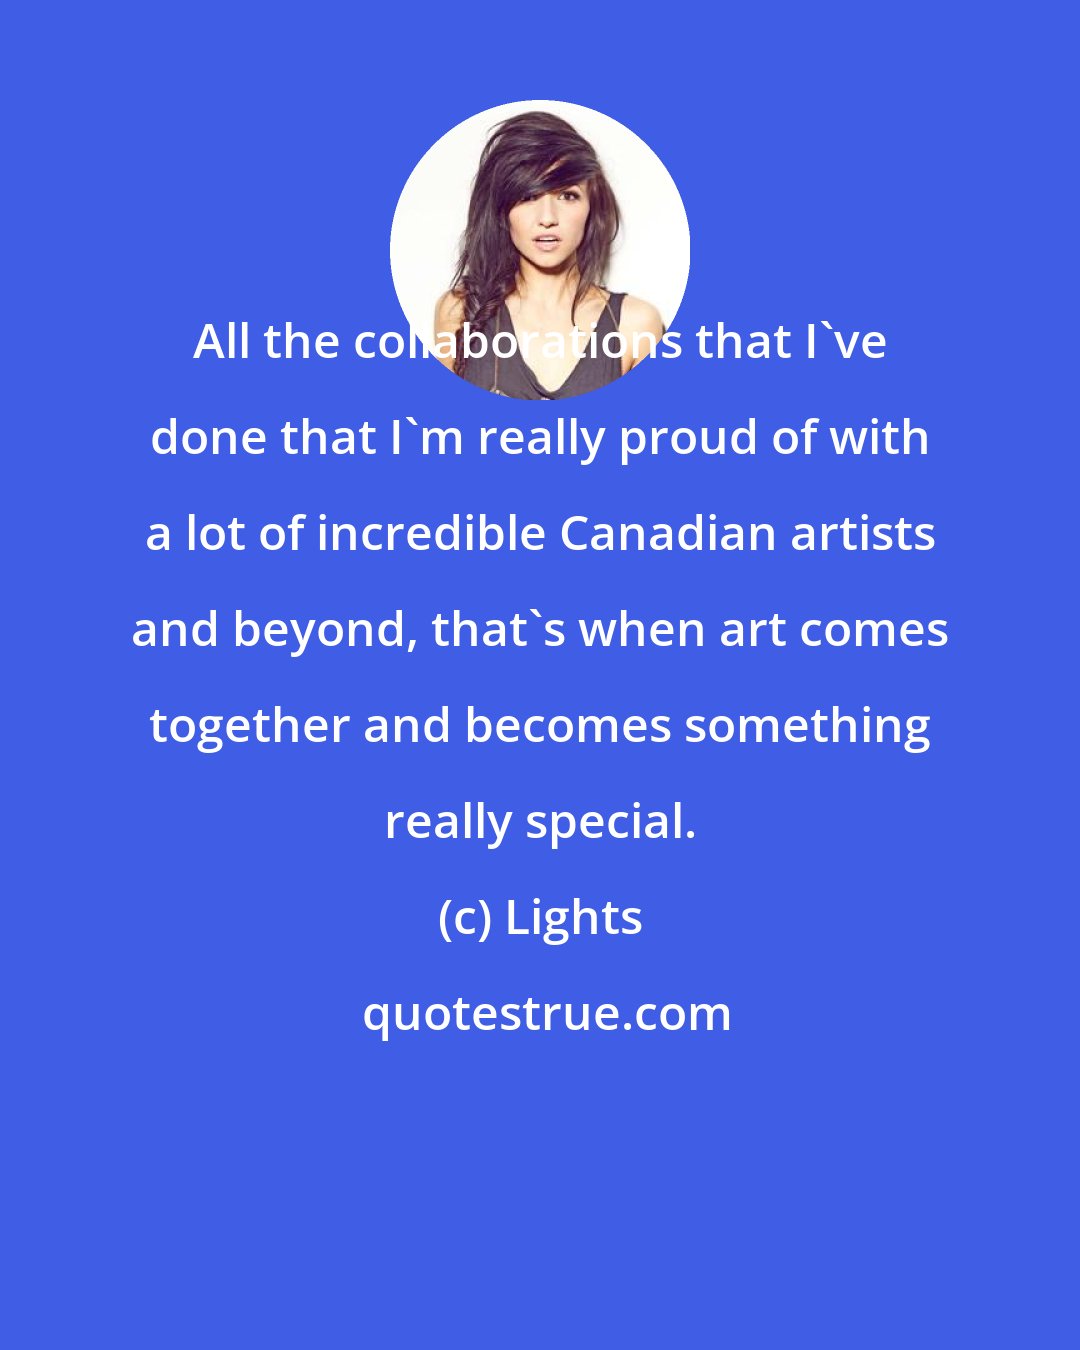 Lights: All the collaborations that I've done that I'm really proud of with a lot of incredible Canadian artists and beyond, that's when art comes together and becomes something really special.